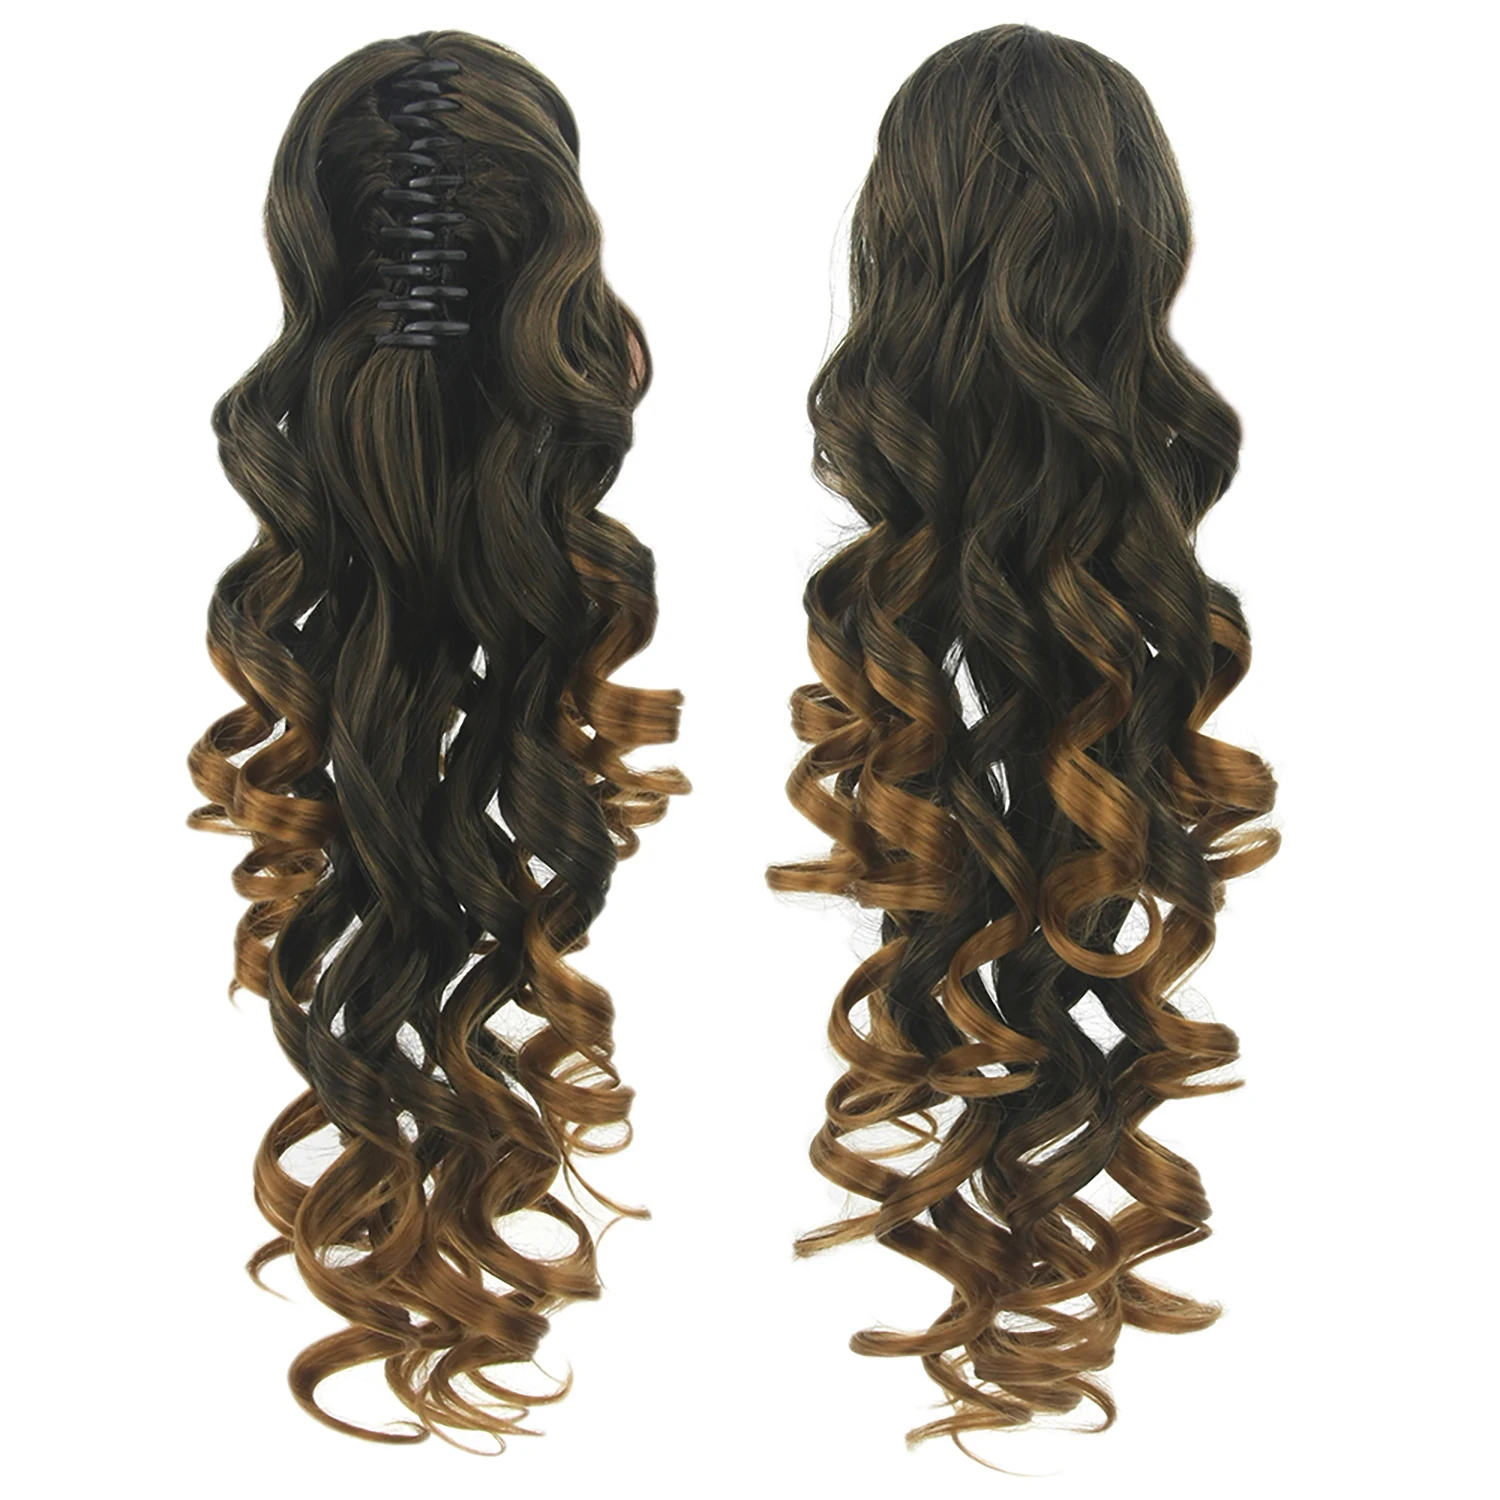 

Soowee Long Ombre Brown Curly Clip in Ponytails Hairpieces Claw Headwear Fake Pony Tail Hair Extensions Postiche Peluca Roja